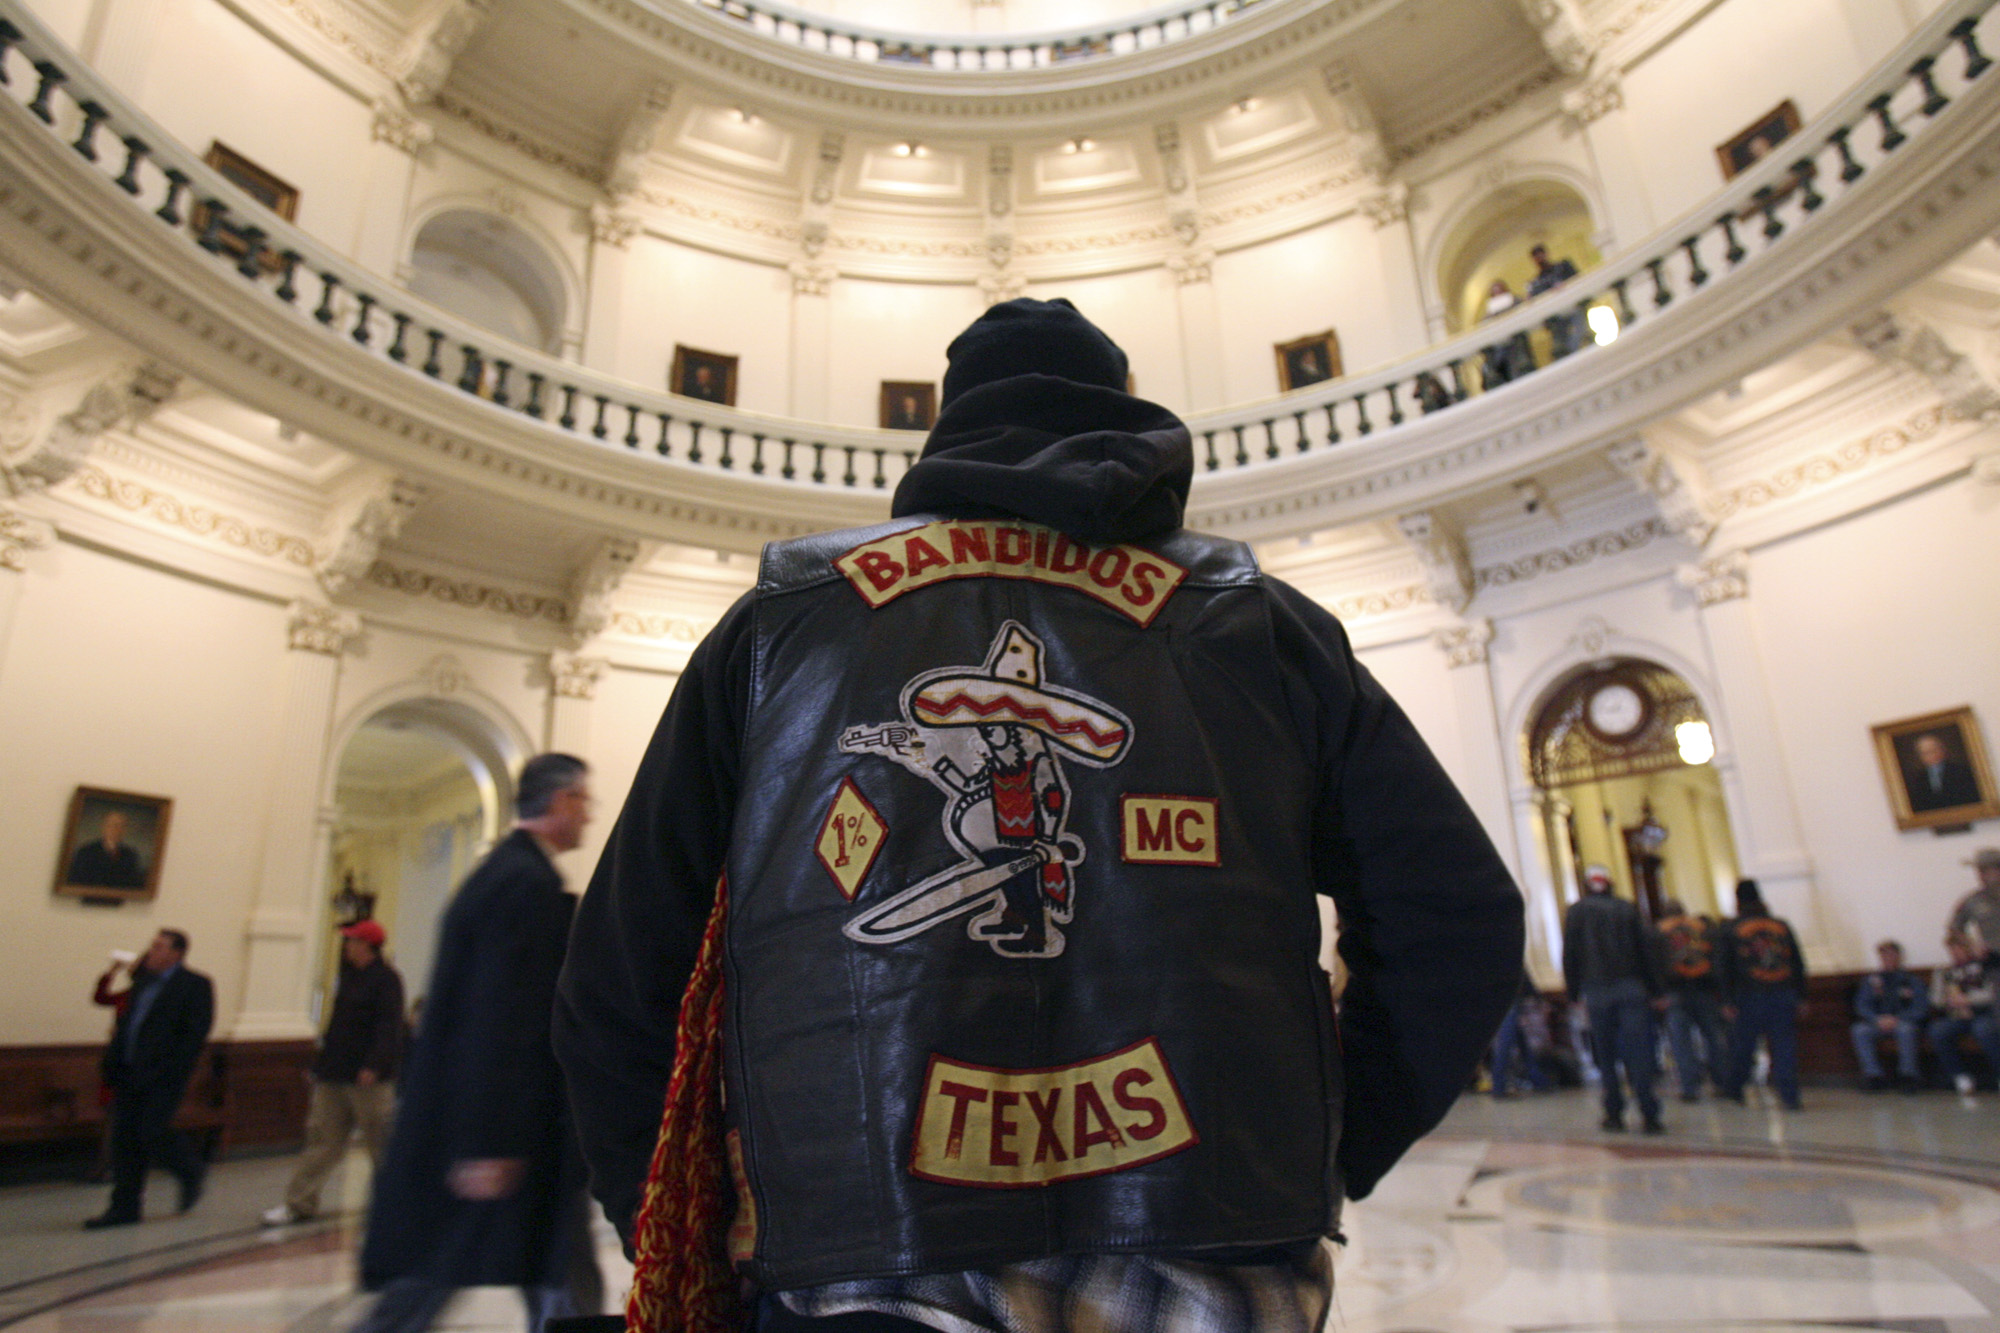 21-facts-about-the-bandidos-outlaw-motorcycle-gang-san-antonio